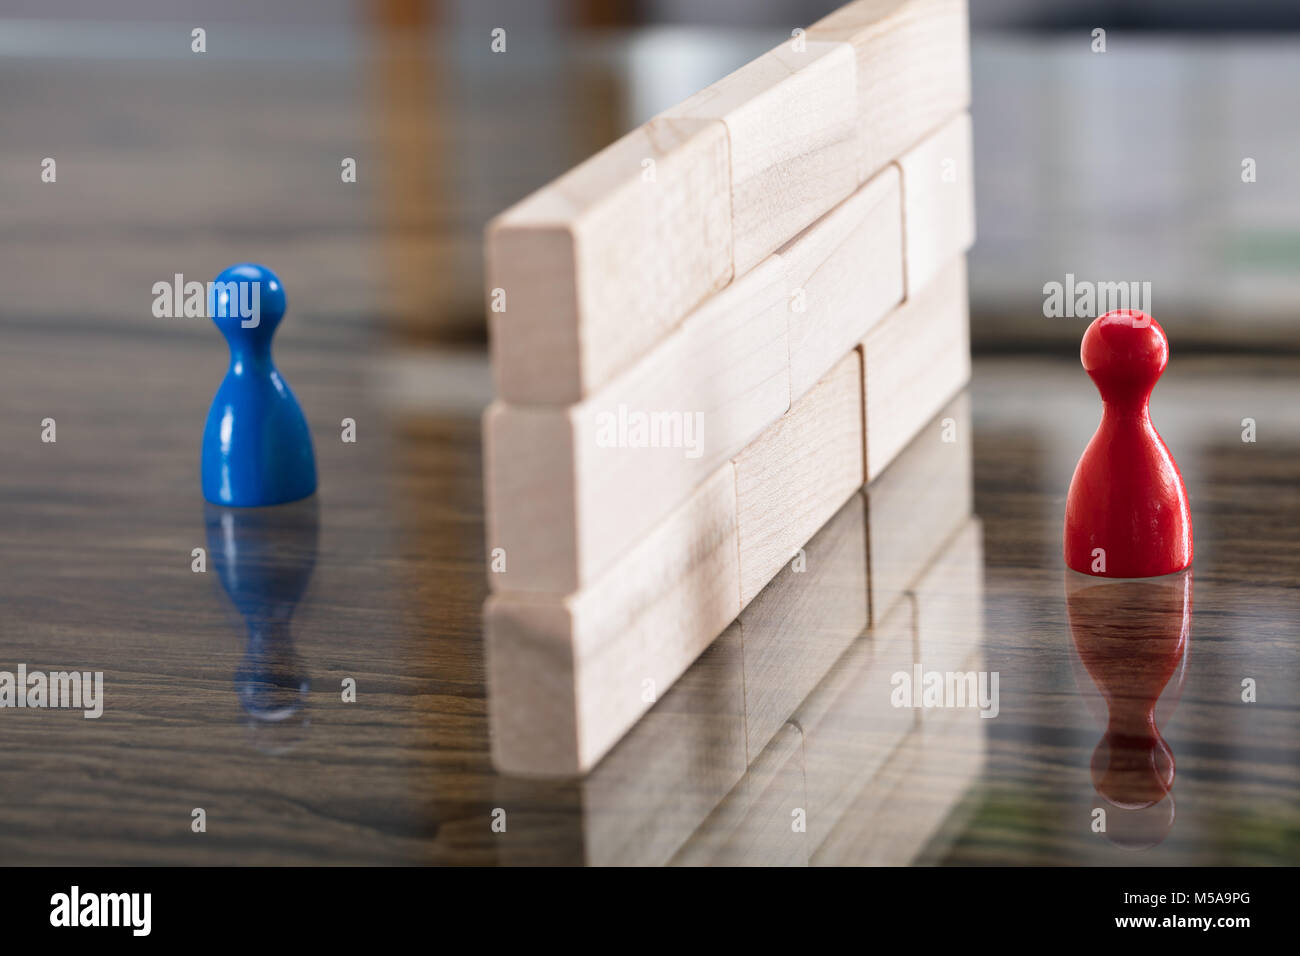 Close-up Of Red And Blue Figurine Paw Separated By Wooden Blocks On Desk Stock Photo